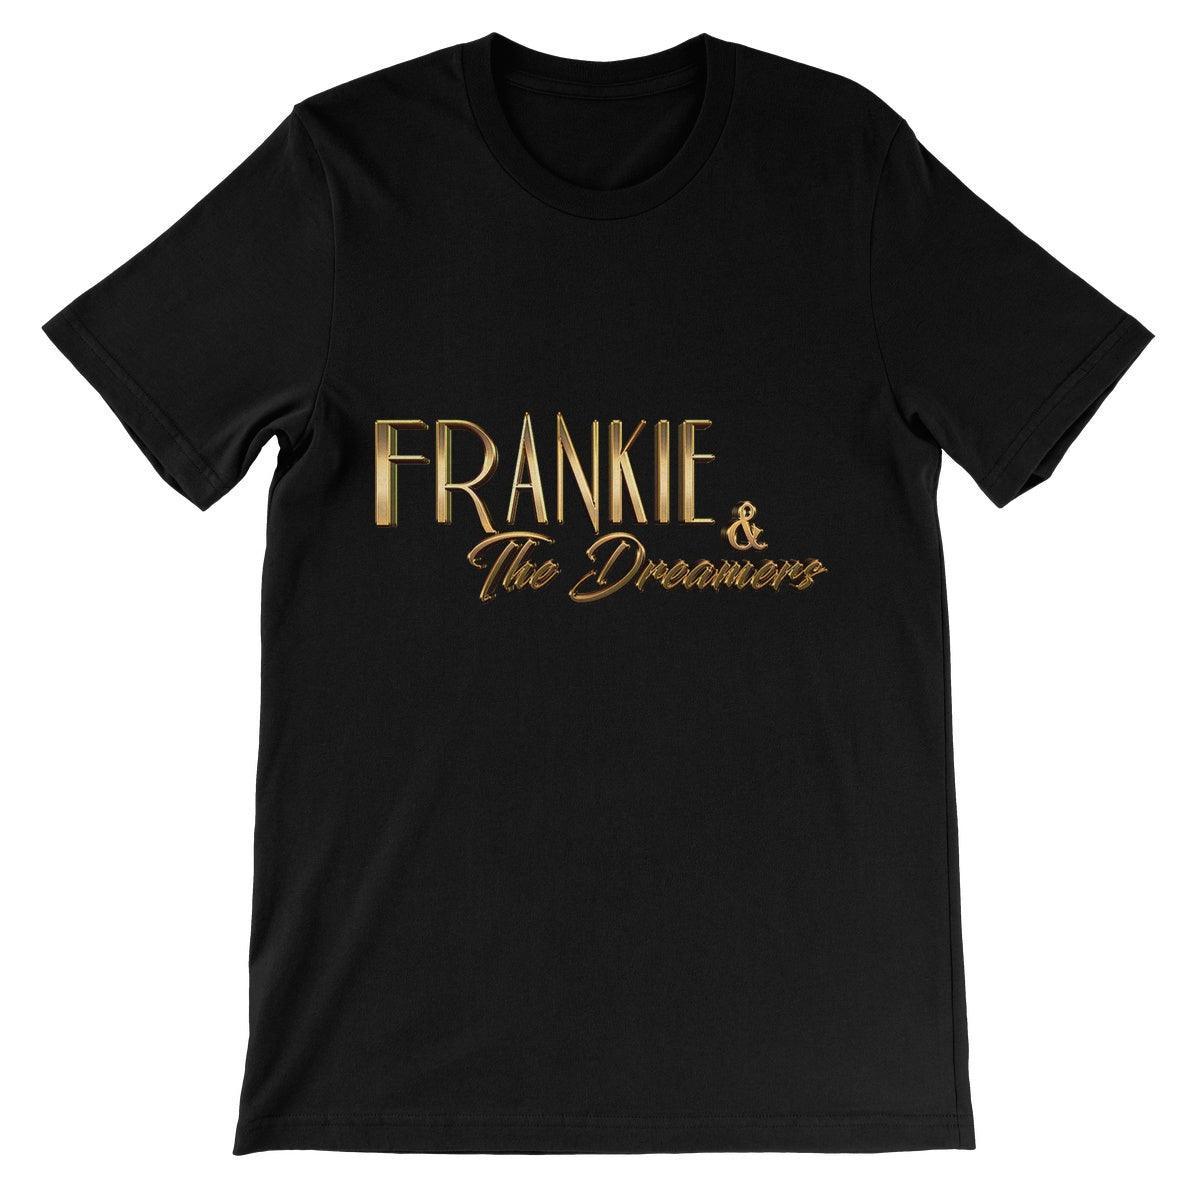 Frankie And The Dreamers Unisex Short Sleeve T-Shirt | Apparel Black